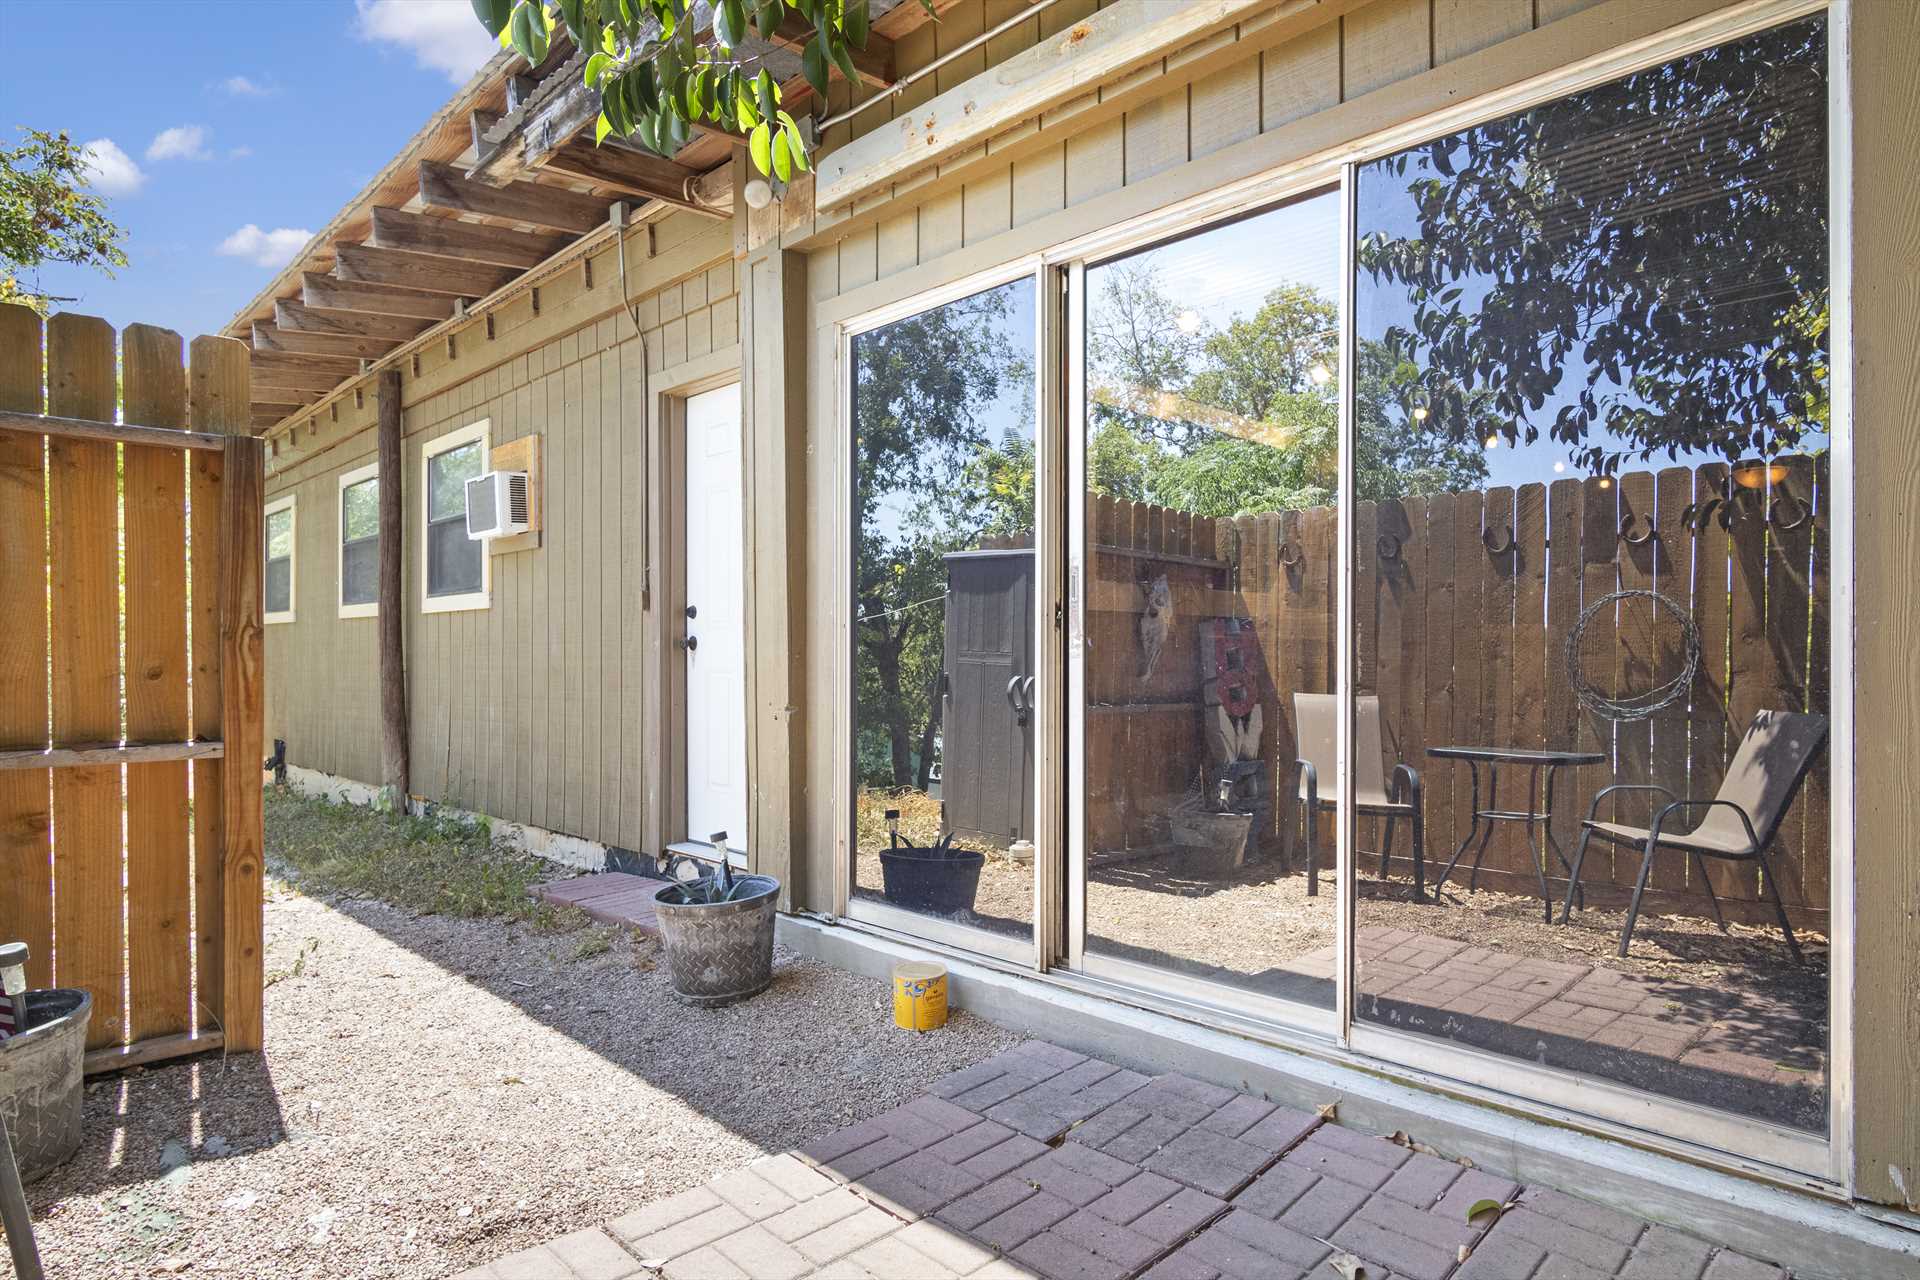                                                 Sliding glass doors allow access to the patio, and let in plenty of natural light, too!